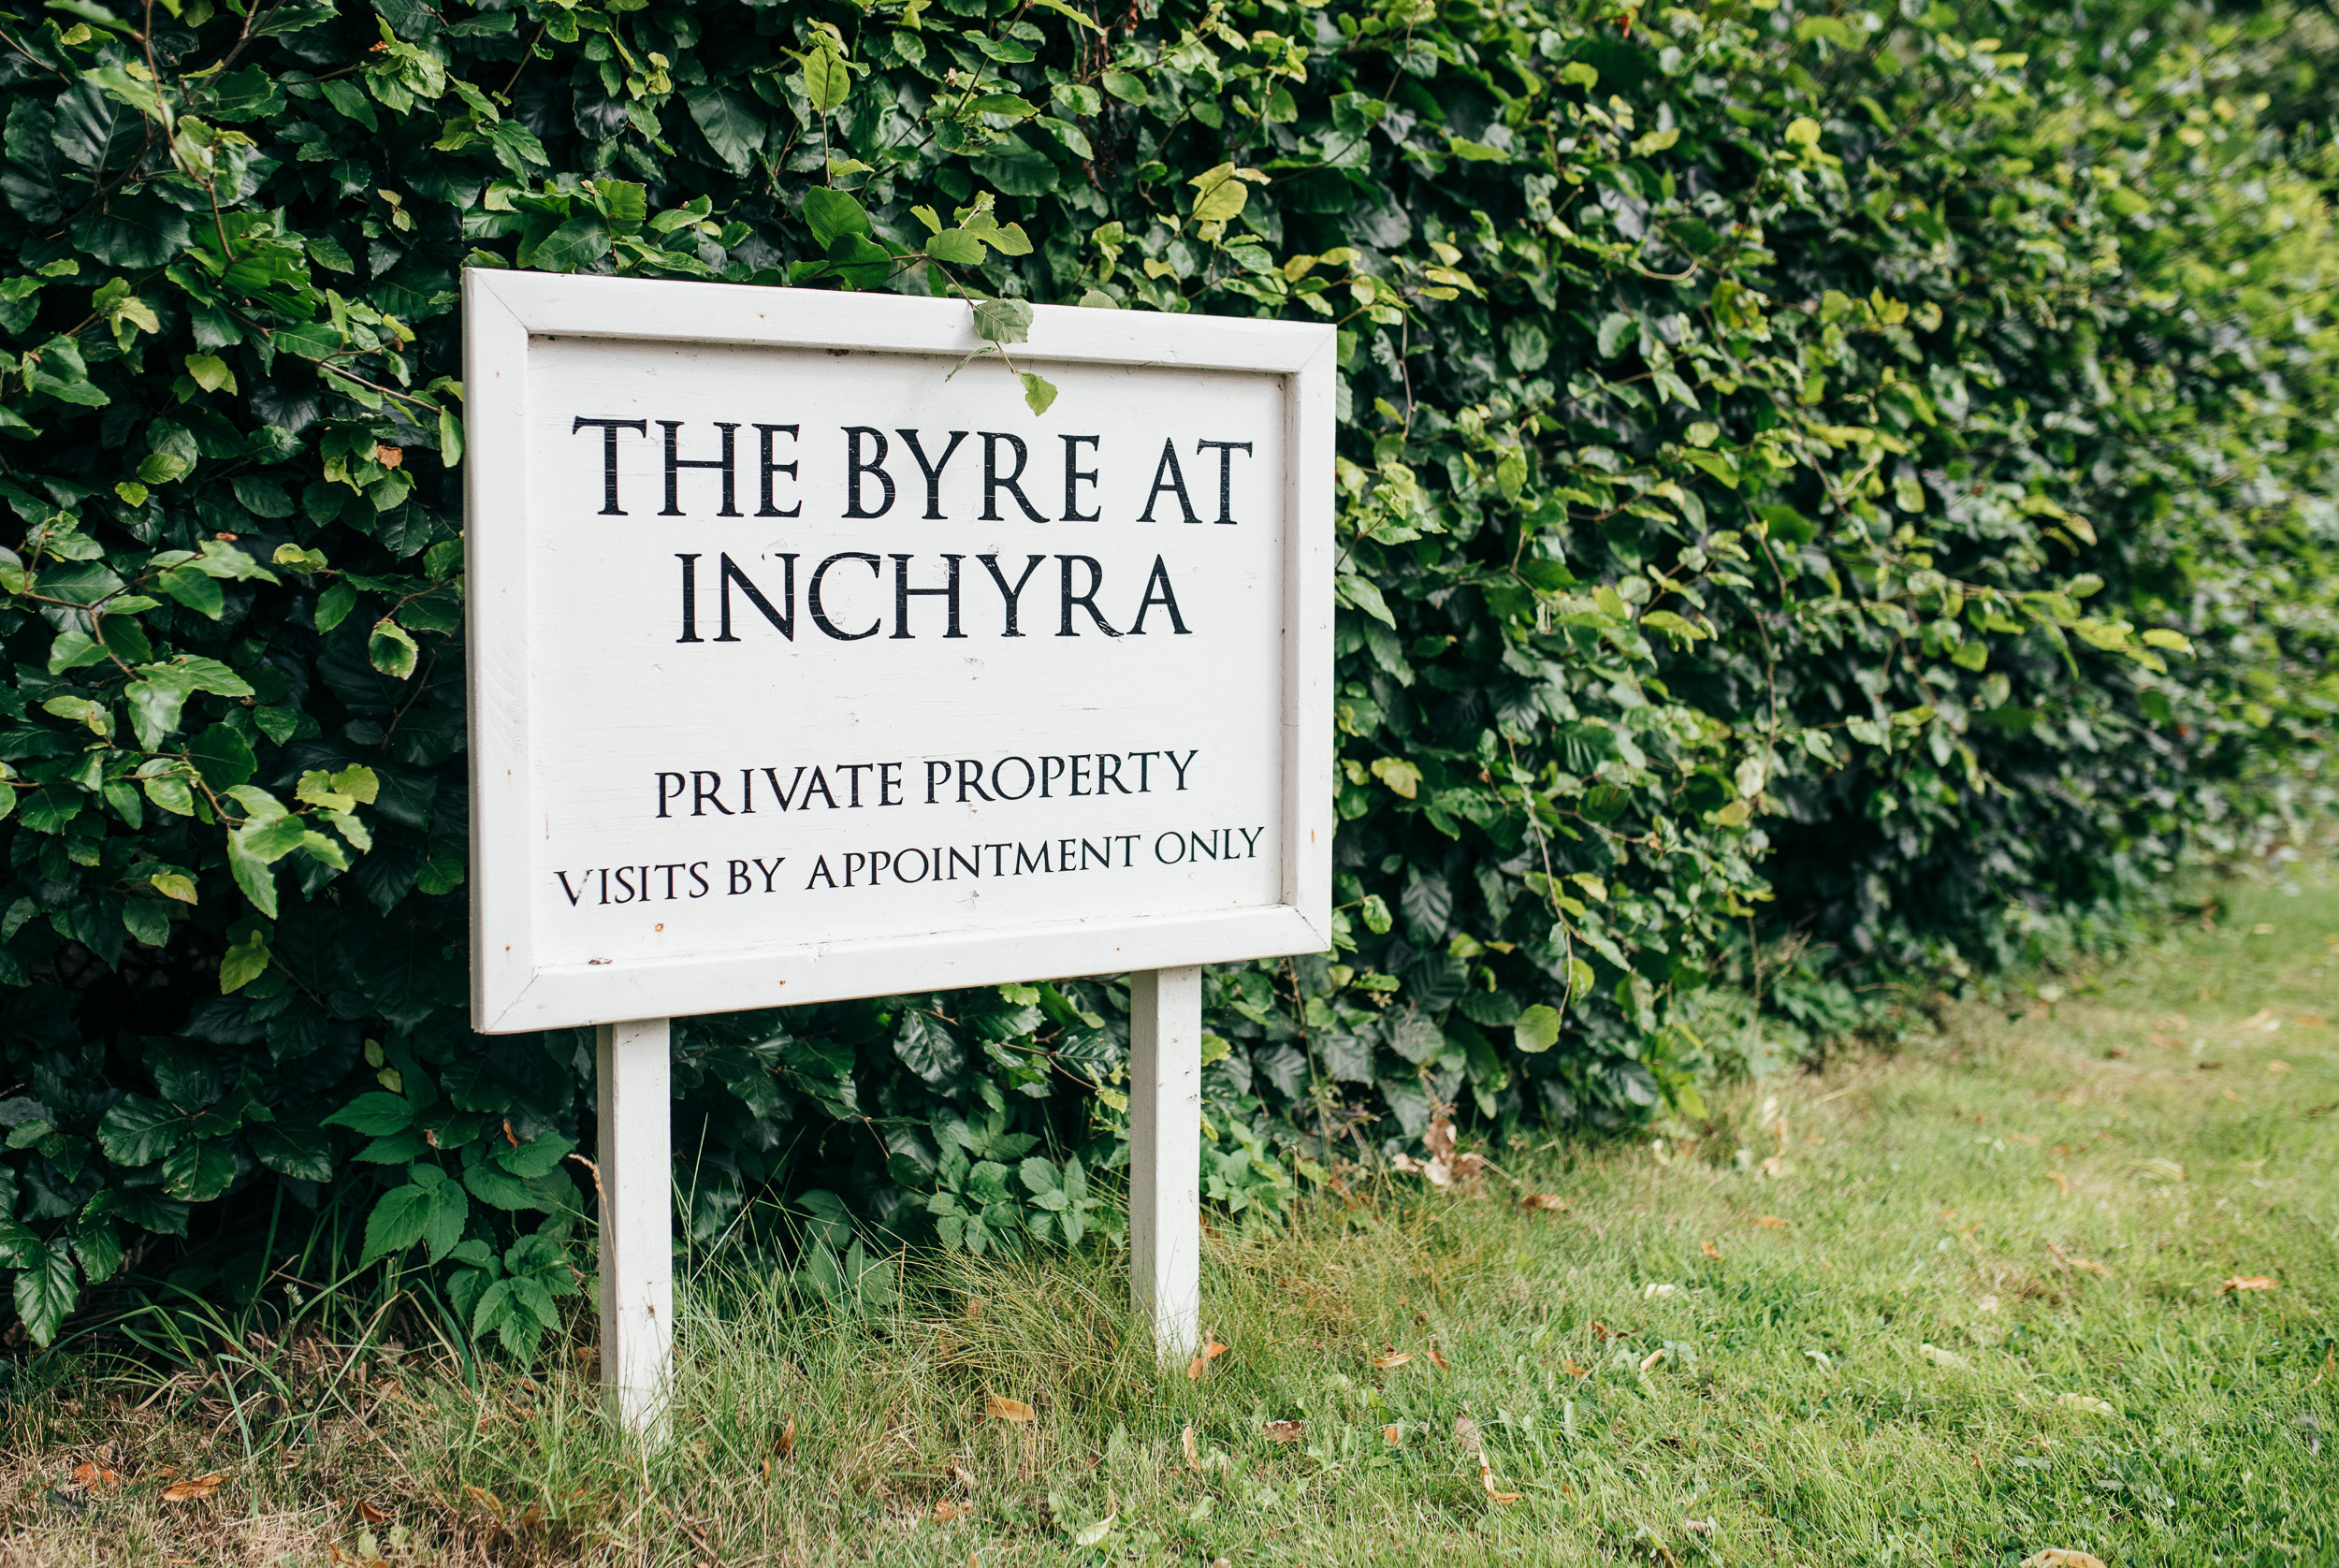 They Byre at Inchyra